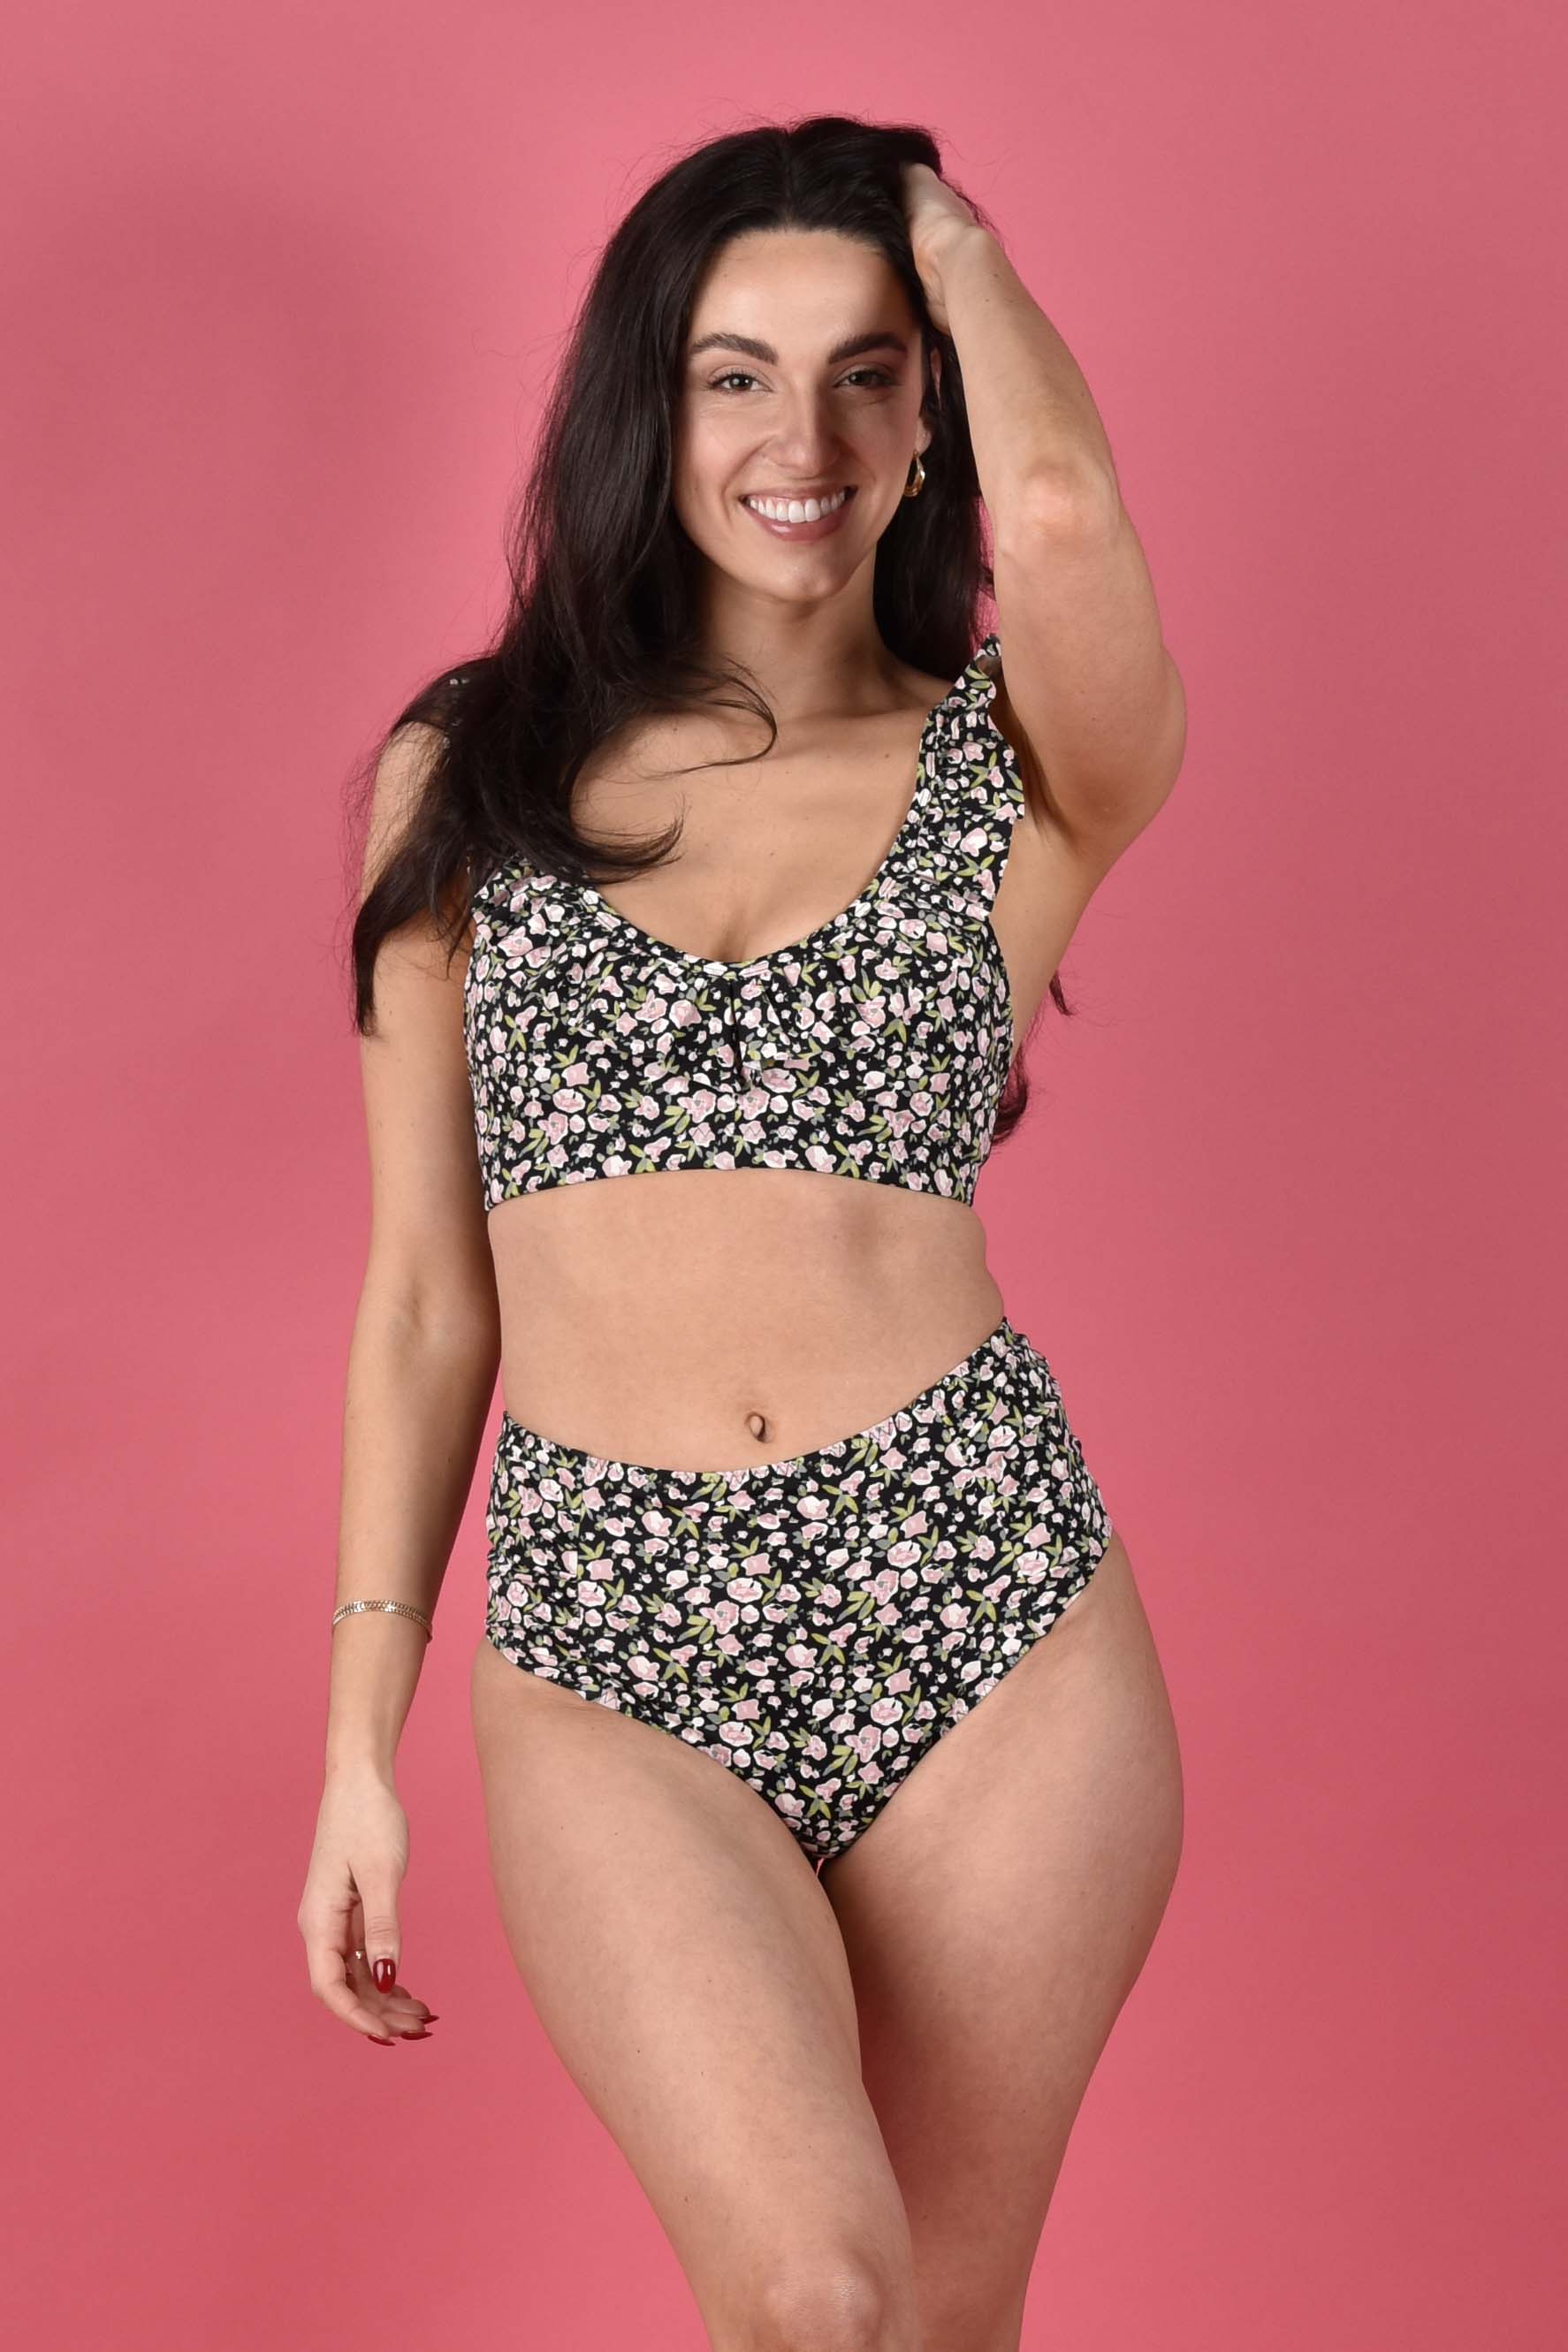 WEAR LOVE MORE Heather Recycled Luxe Swim Top.  Ruffled Bikini Top in Sugar Pink Floral Print.  Paired with matching bottom